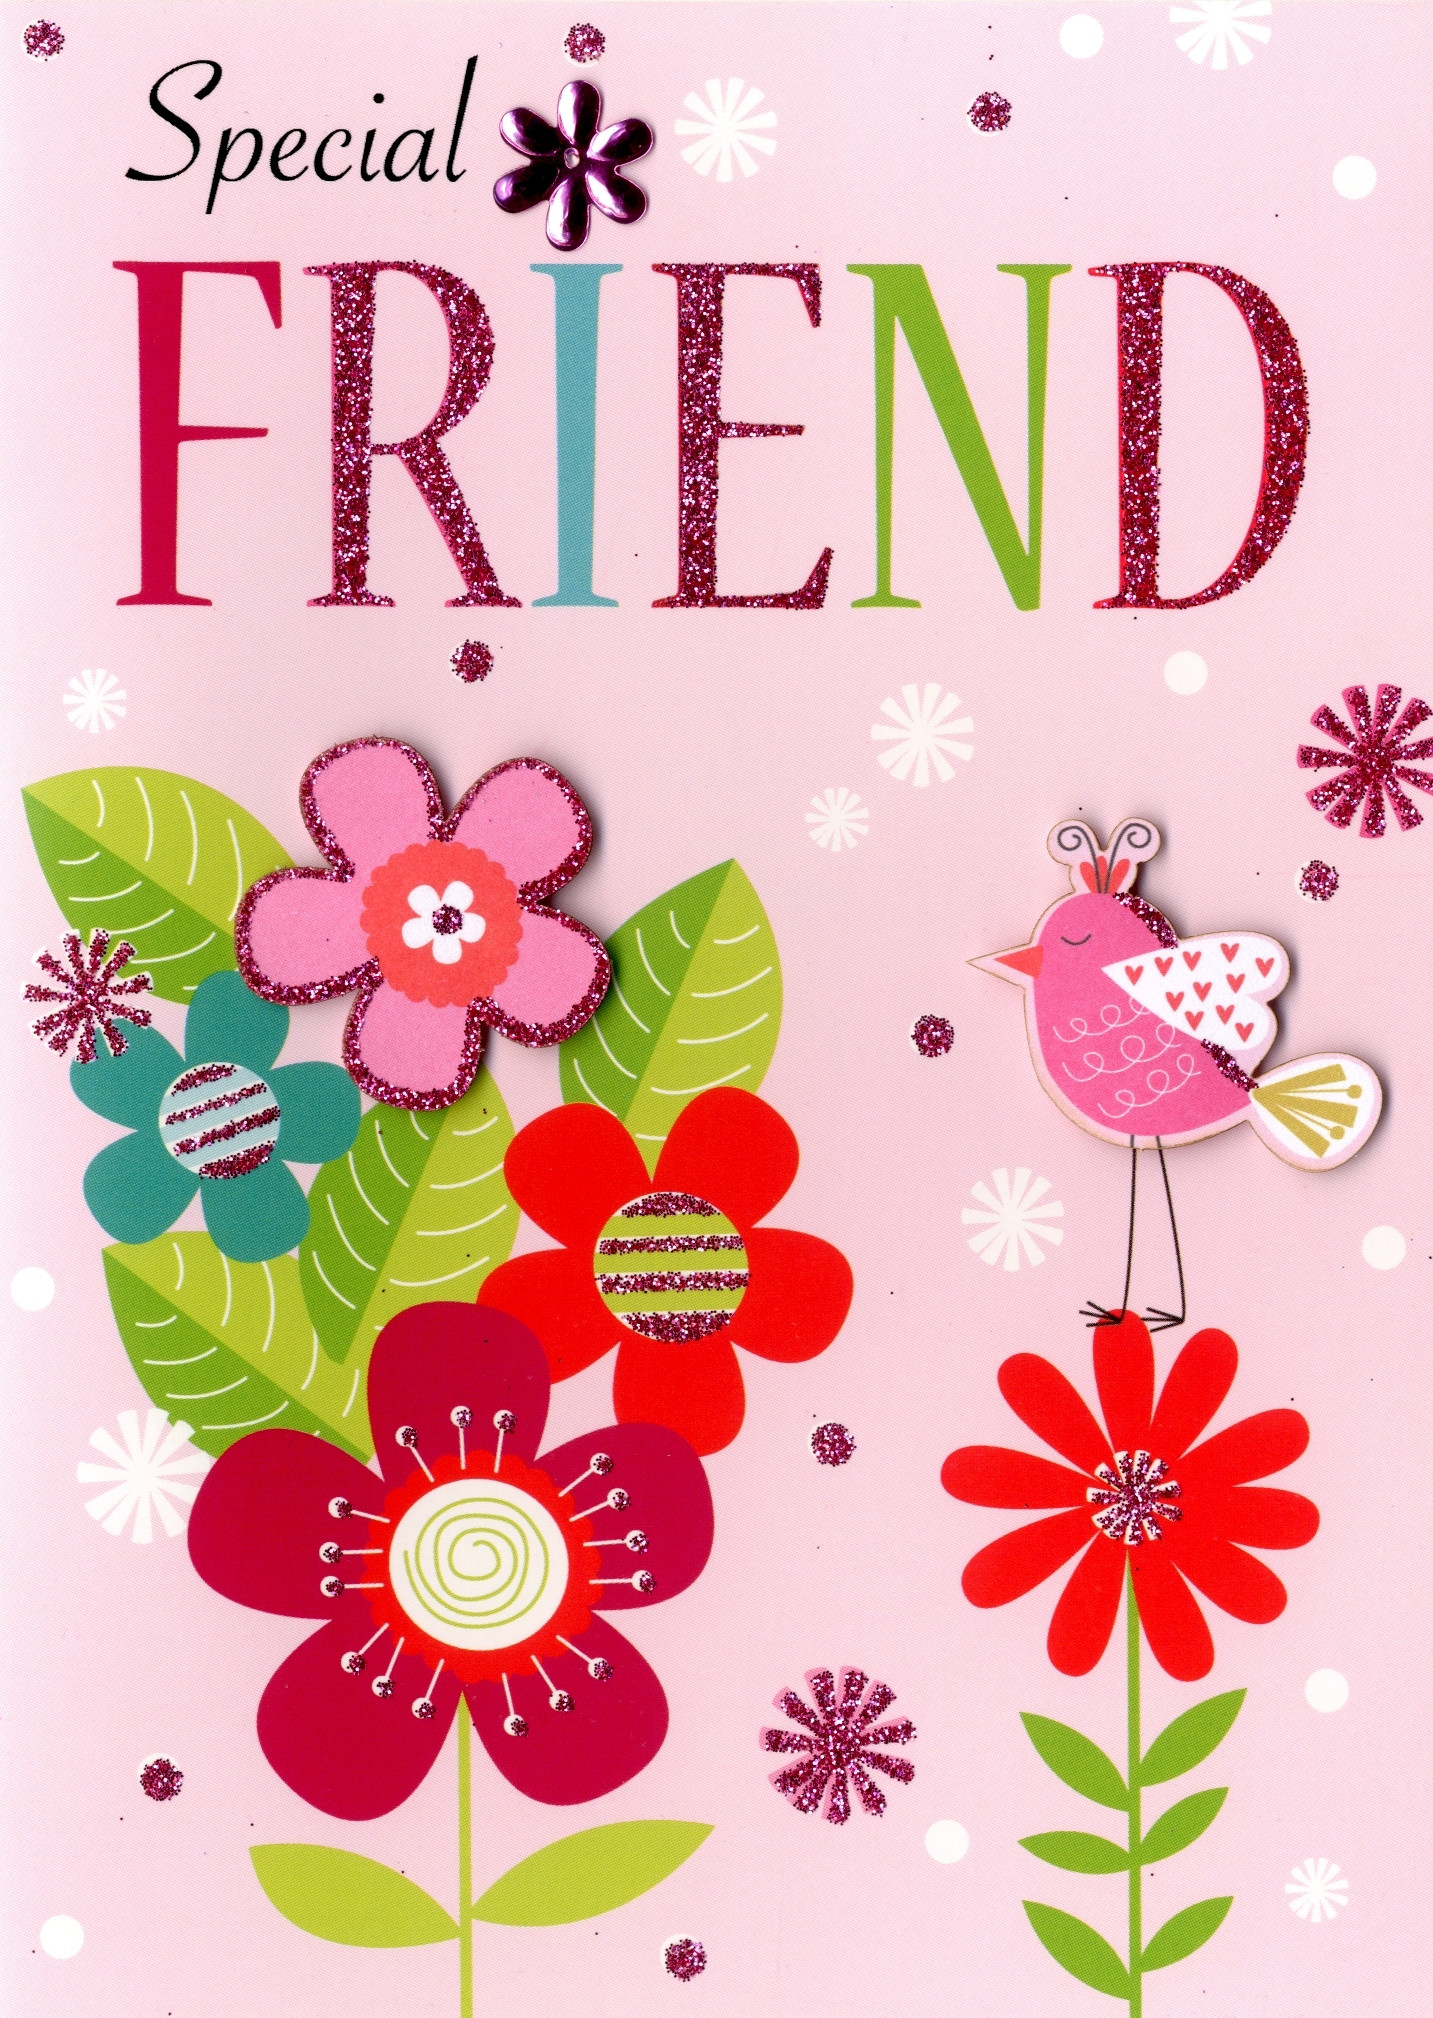 Birthday Wishes To Special Friend
 Special Friend Birthday Greeting Card